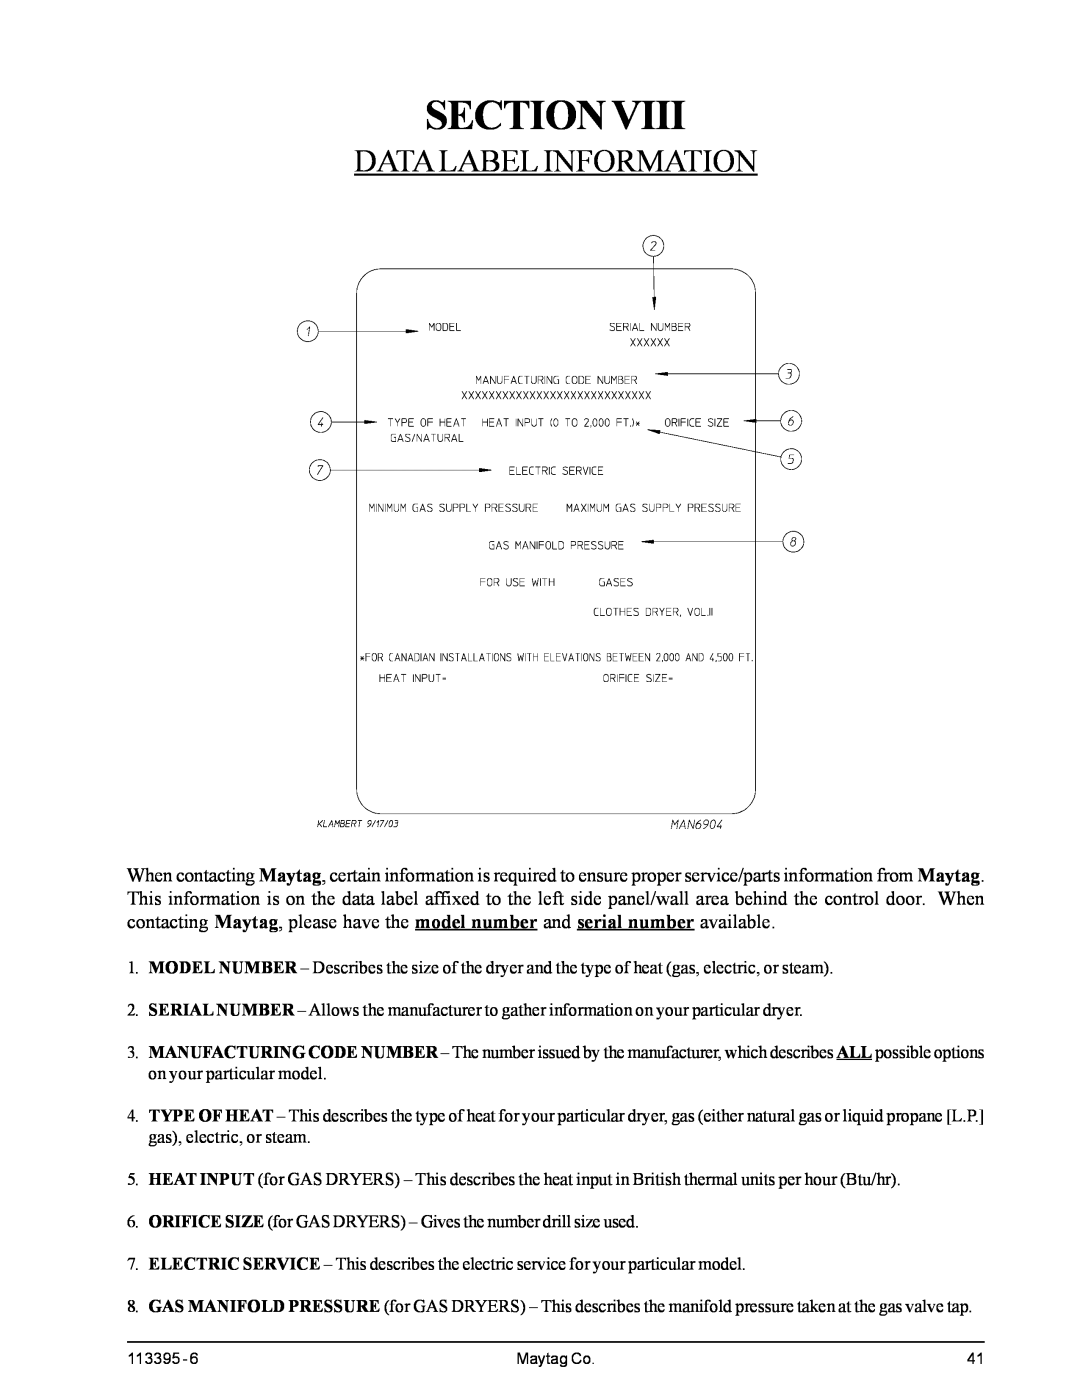 American Dryer Corp MDG-120PVV, MD-170PTVW installation manual Sectionviii, Data Label Information 